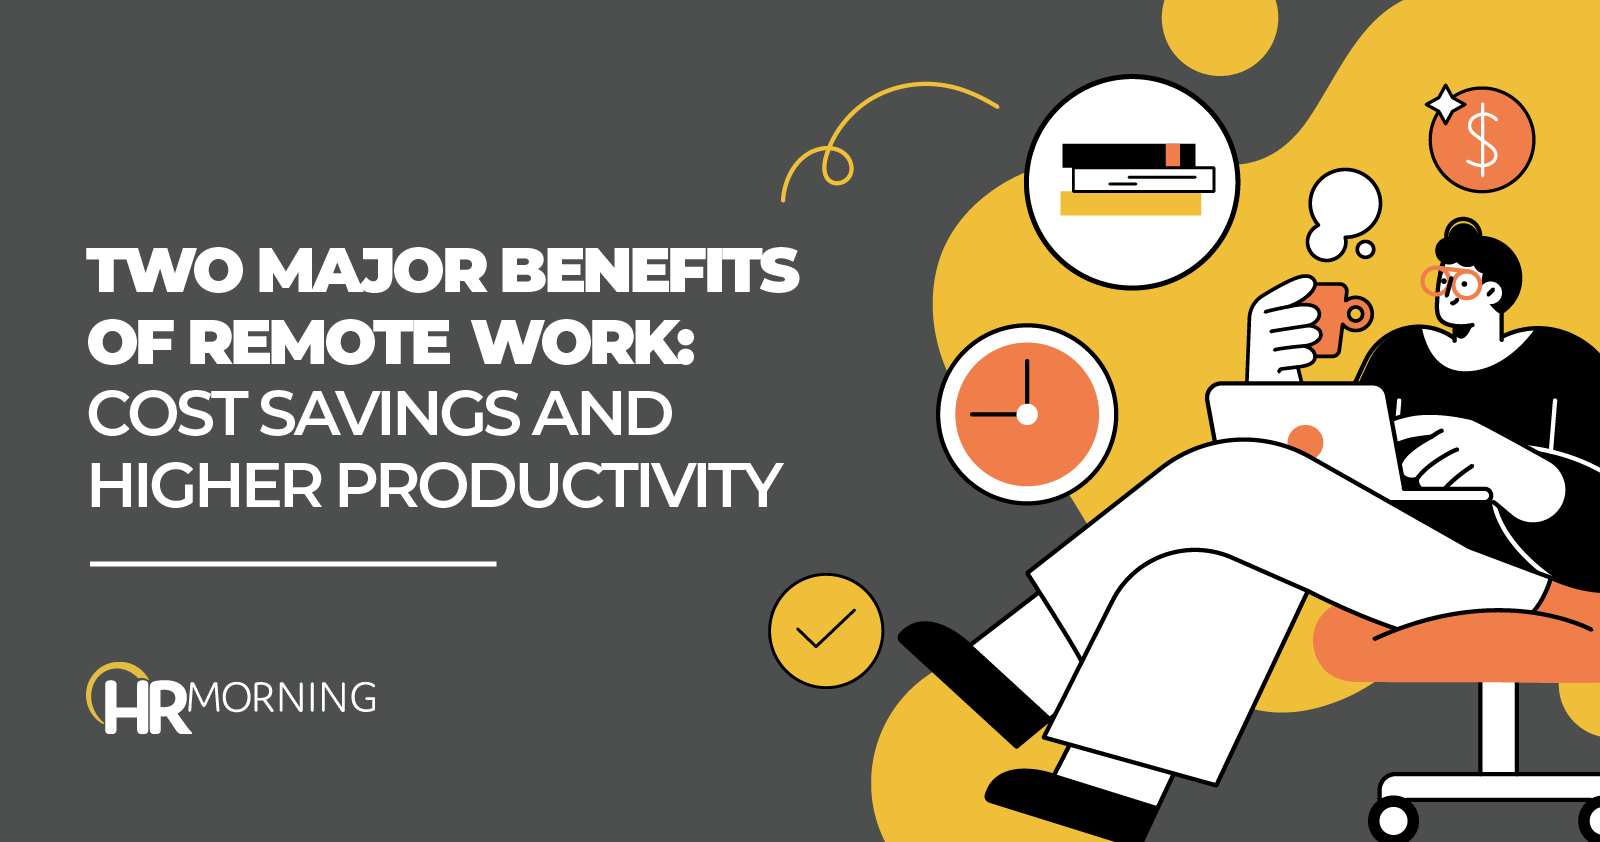 Benefits of remote work for both employees & employers